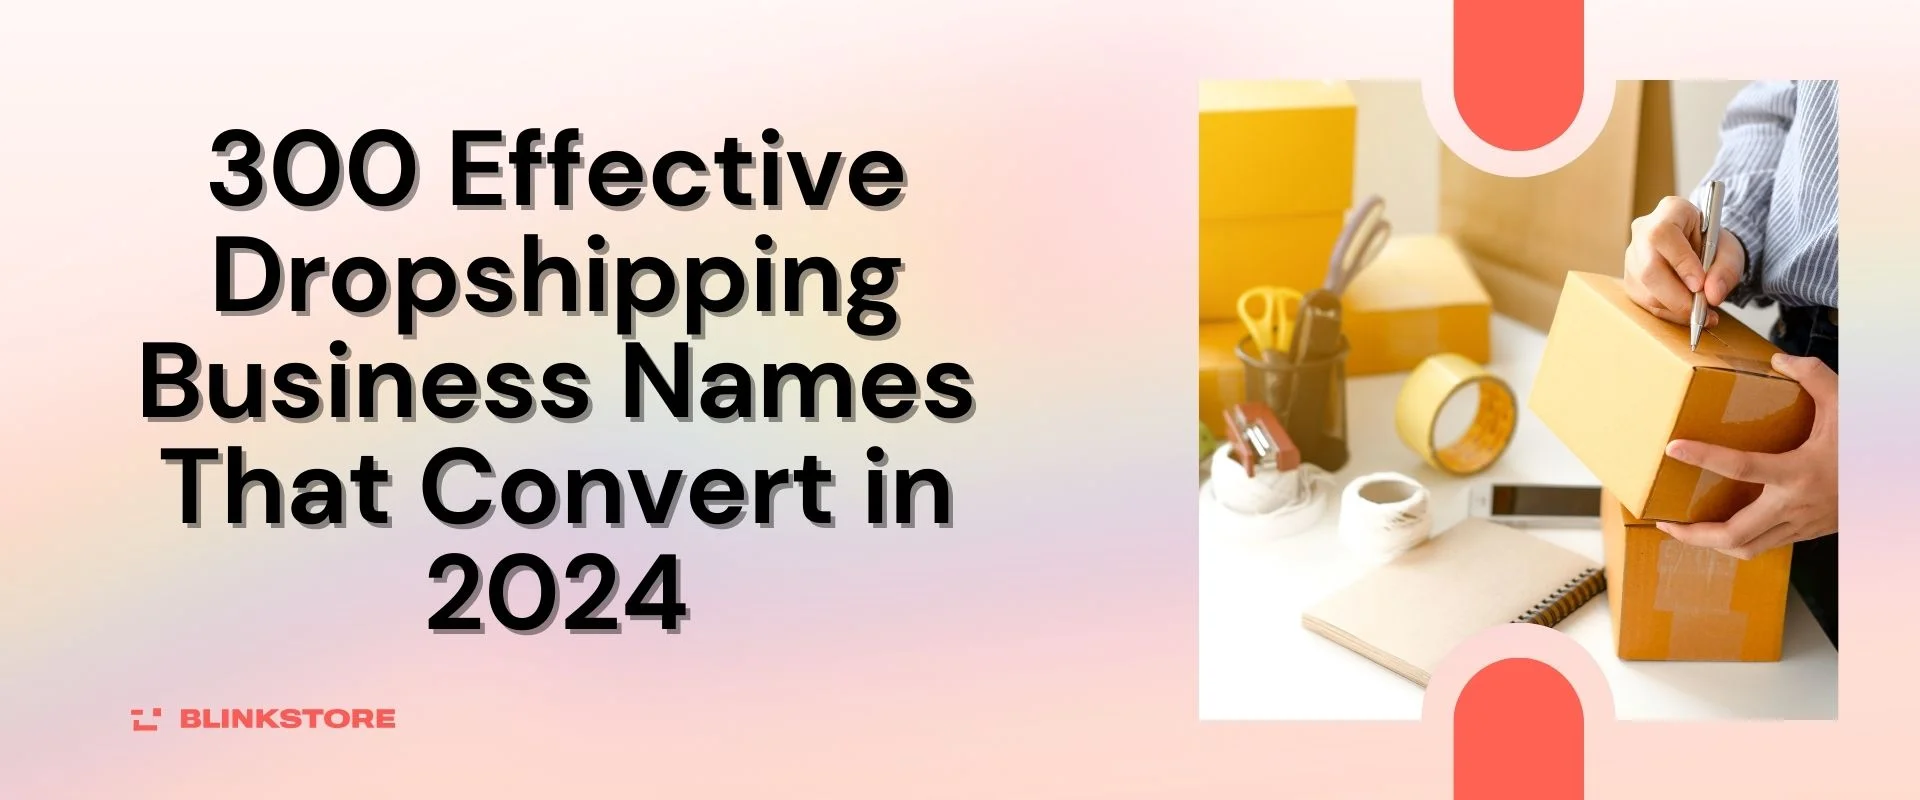 Dropshipping Business Names